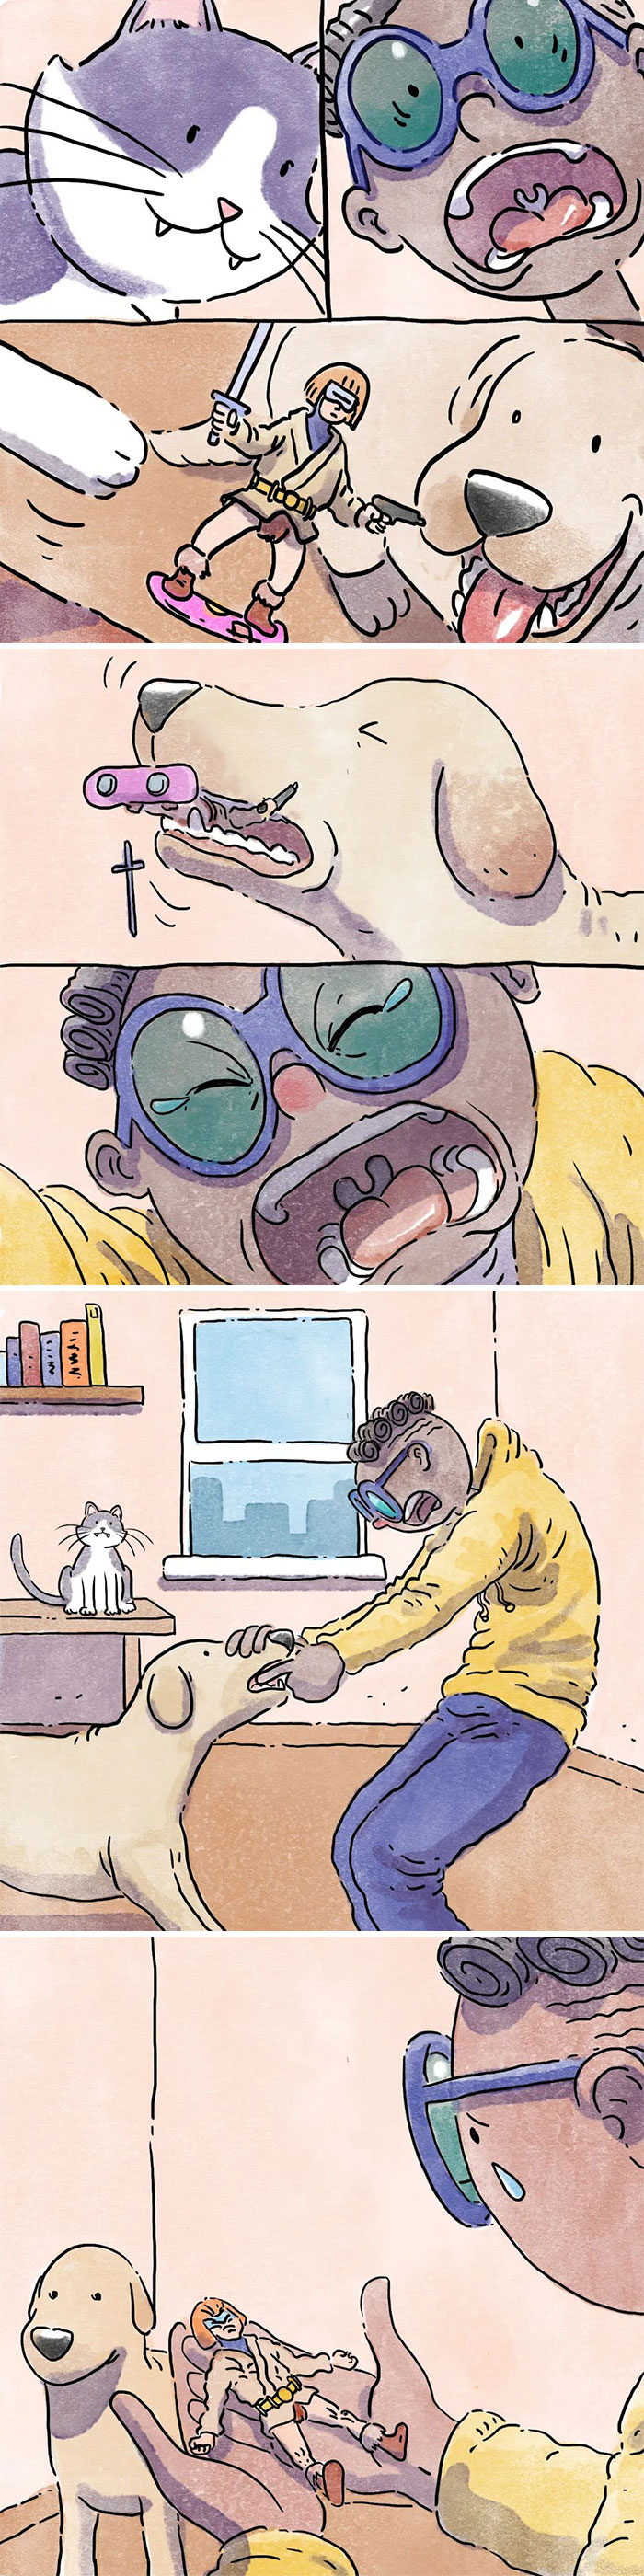 Emotional Comics About Life With A Dog And A Cat By Ademar Vieira (5 New Stories)